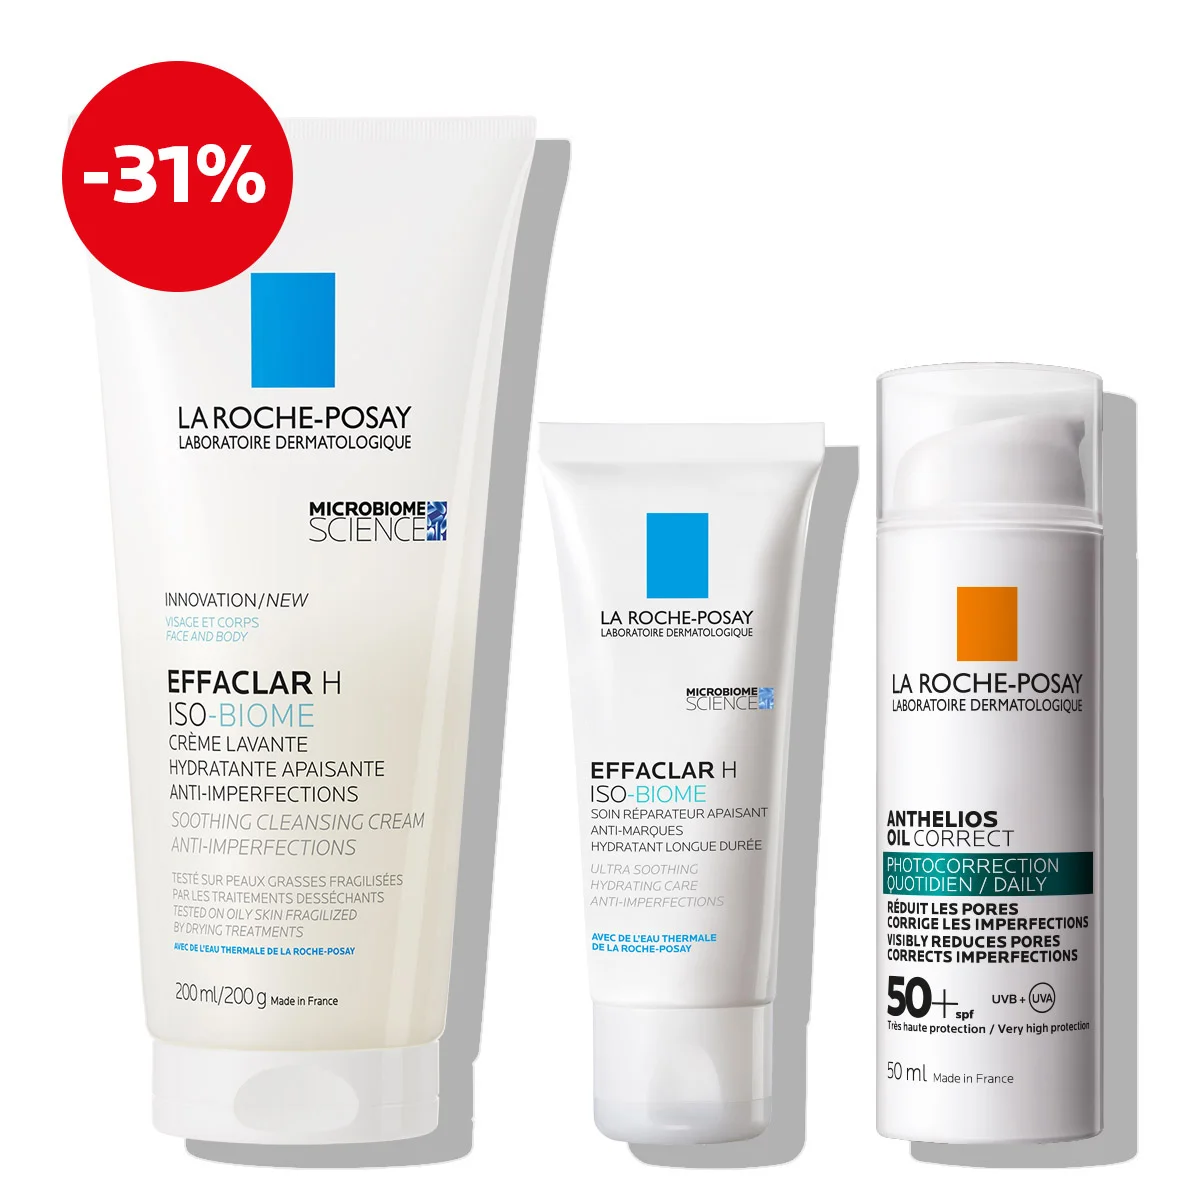 La Roche-Posay EFFACLAR Soothing protocol for skin with irregularities dried out by treatments (hygiene, care, sun protection) (1)